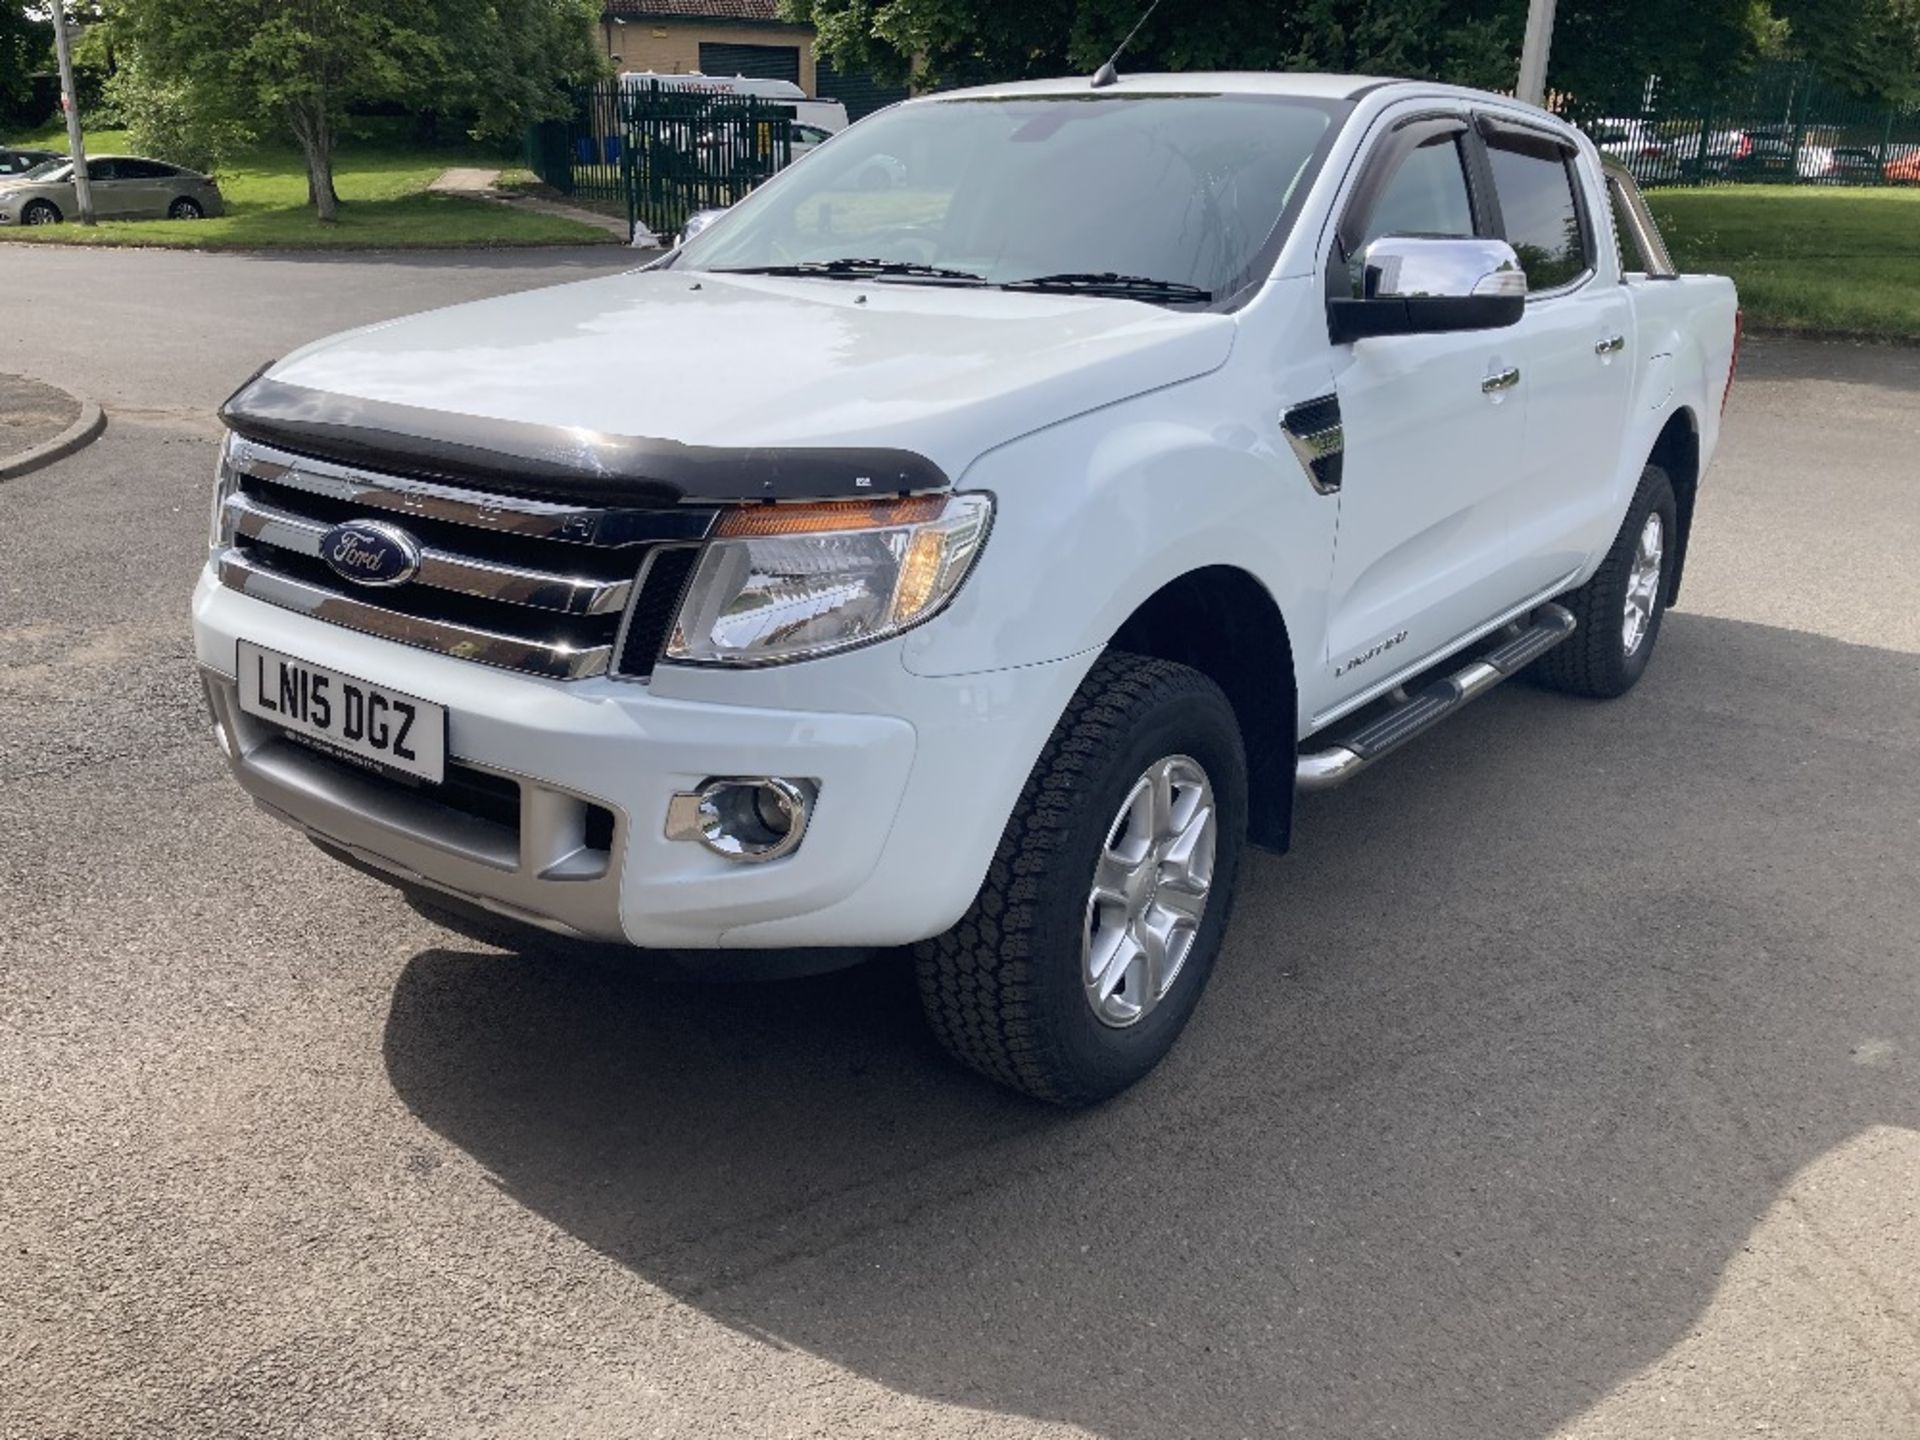 Ford Ranger Limited 3.2TDCI Double Cab Pick Up - Image 2 of 10